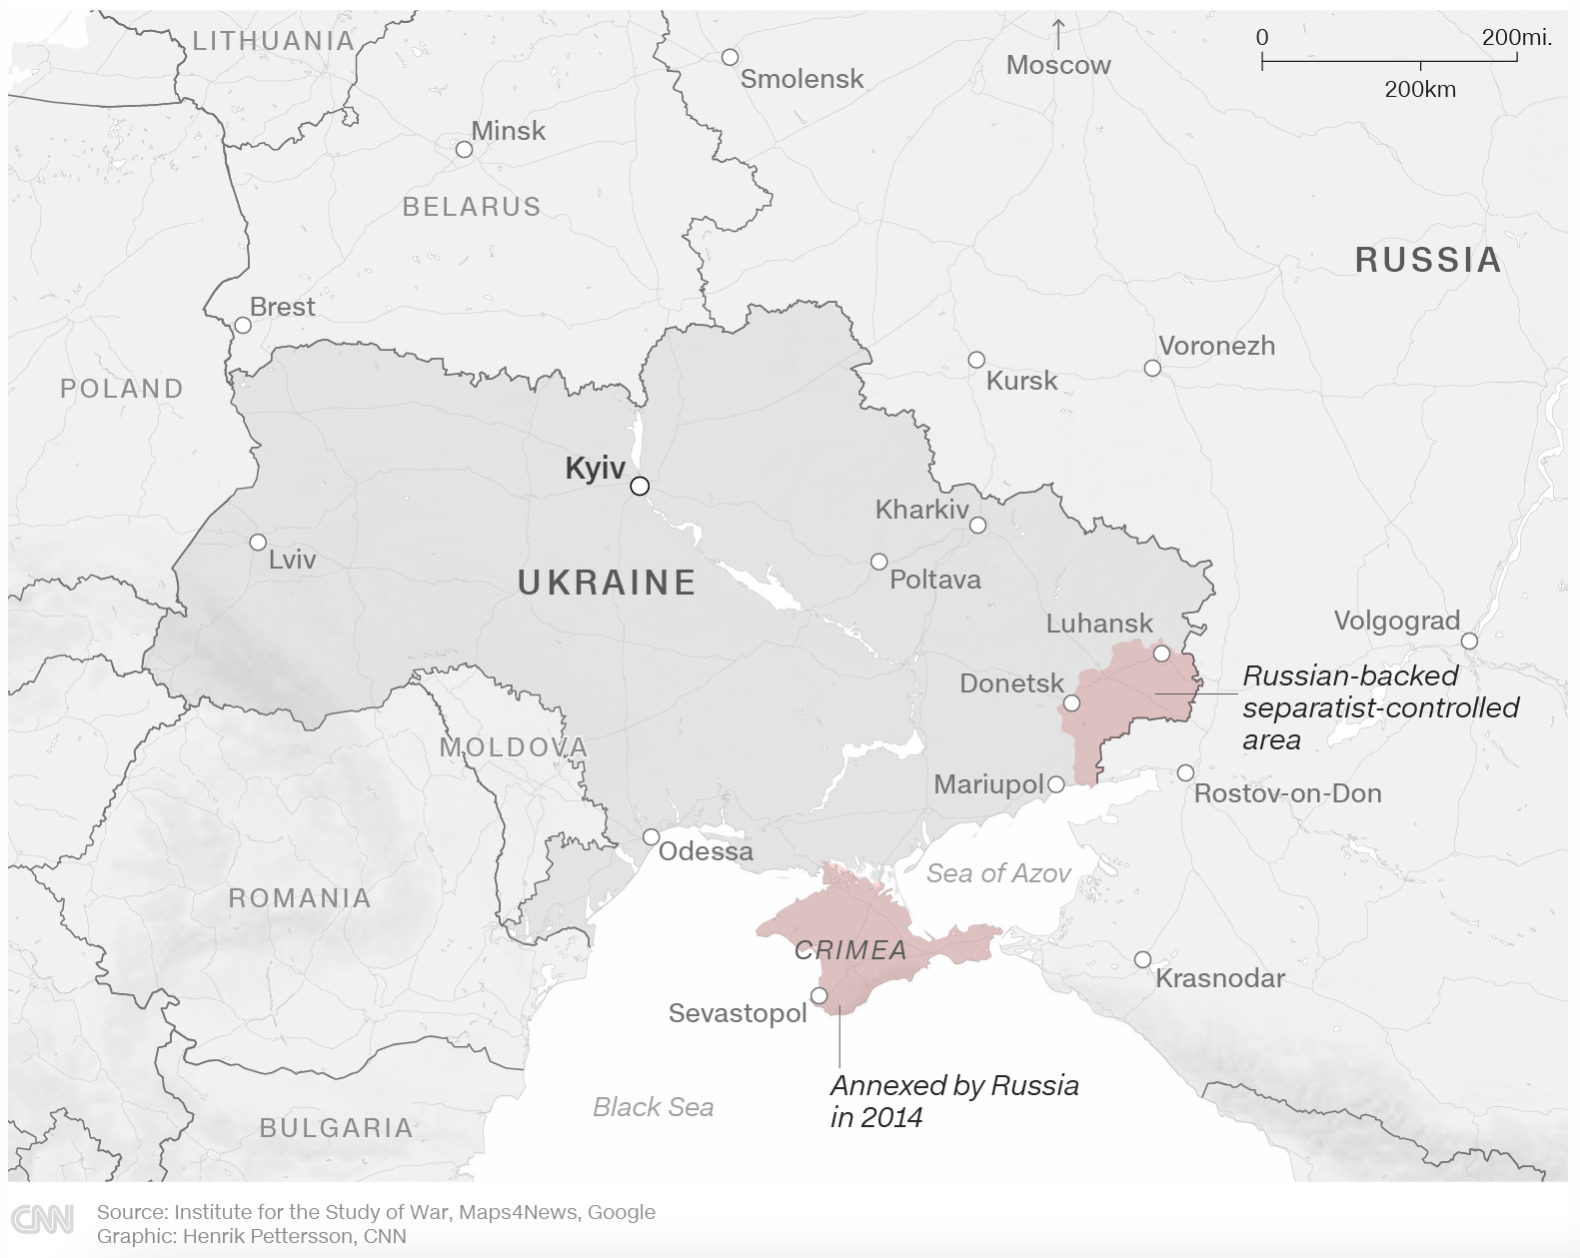 Map of Ukraine shows tensions at borders with Russia